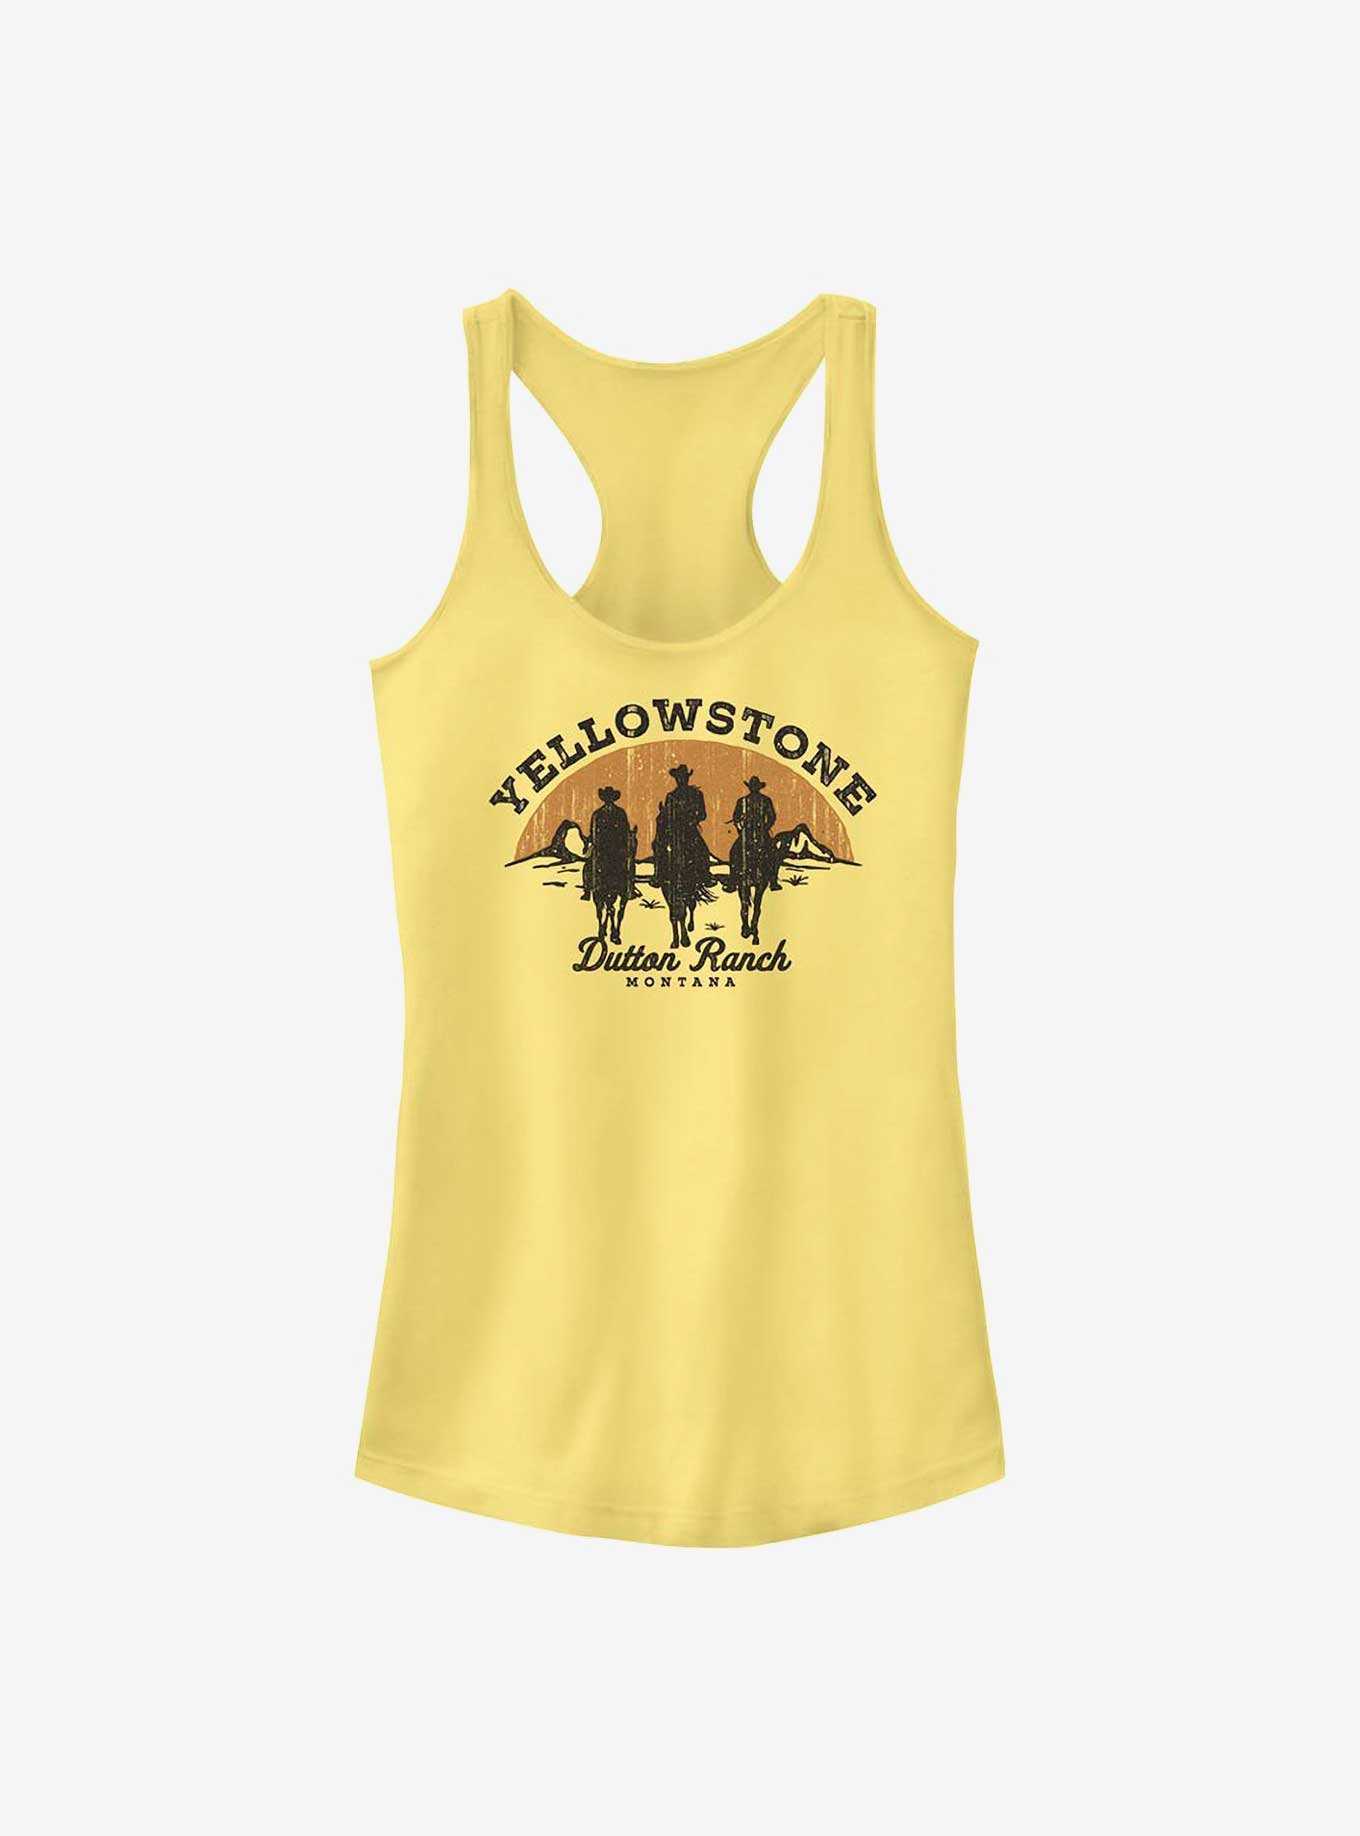 Yellowstone Riding Into The Sunset Girls Tank, , hi-res